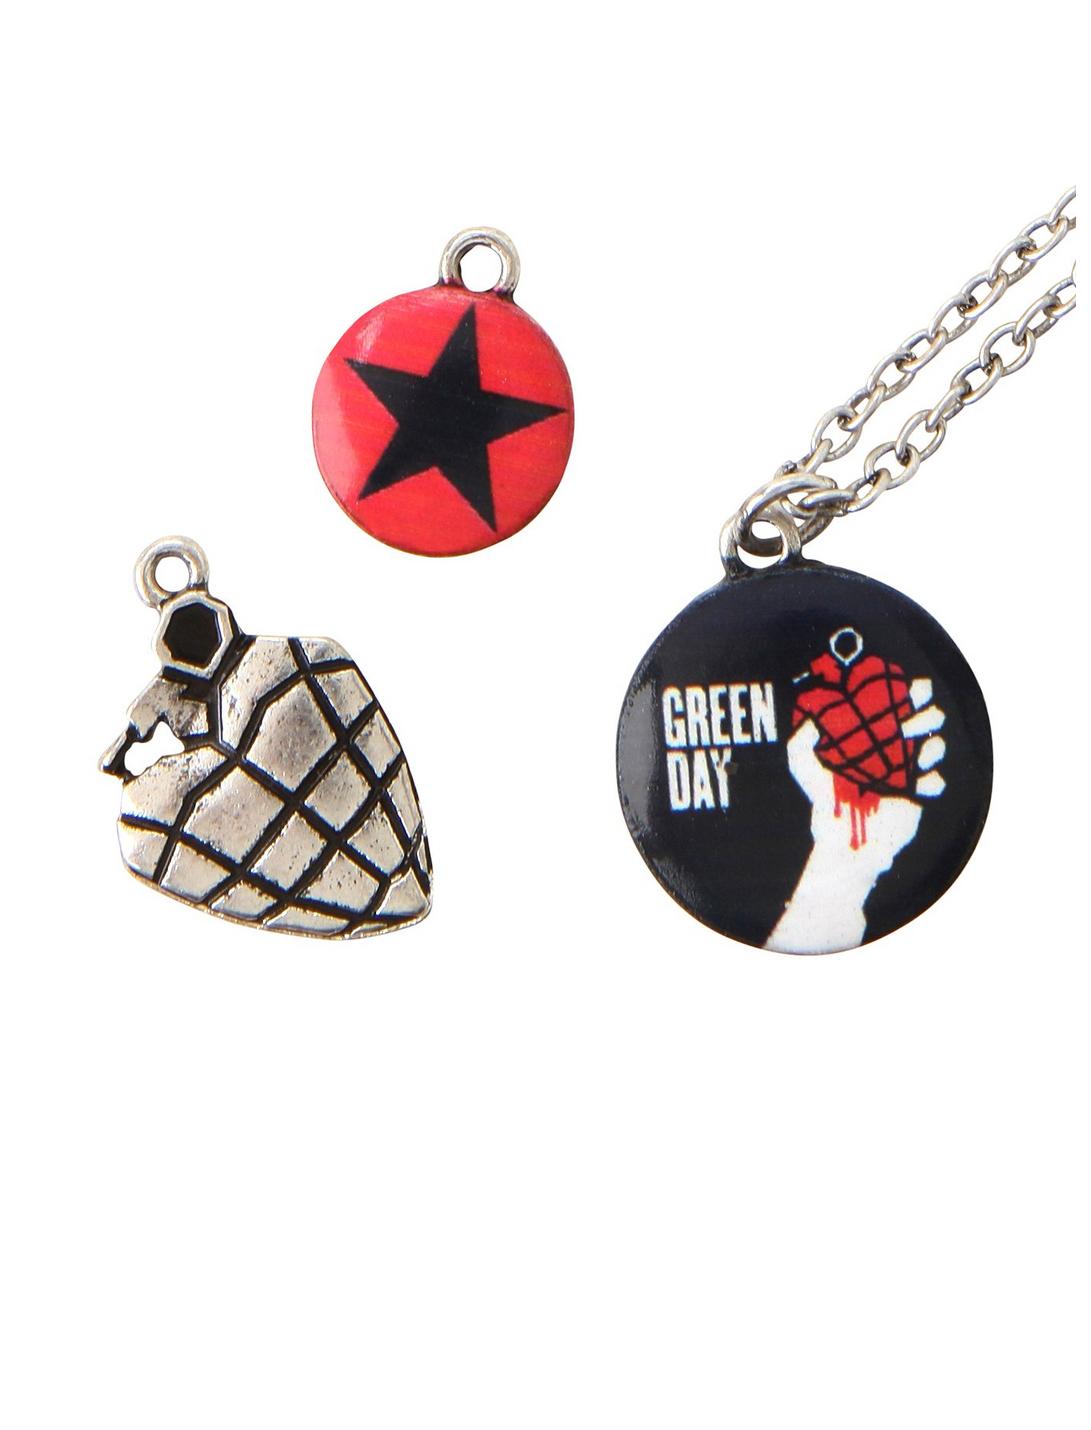 Green Day Interchangeable Charm Necklace, , hi-res